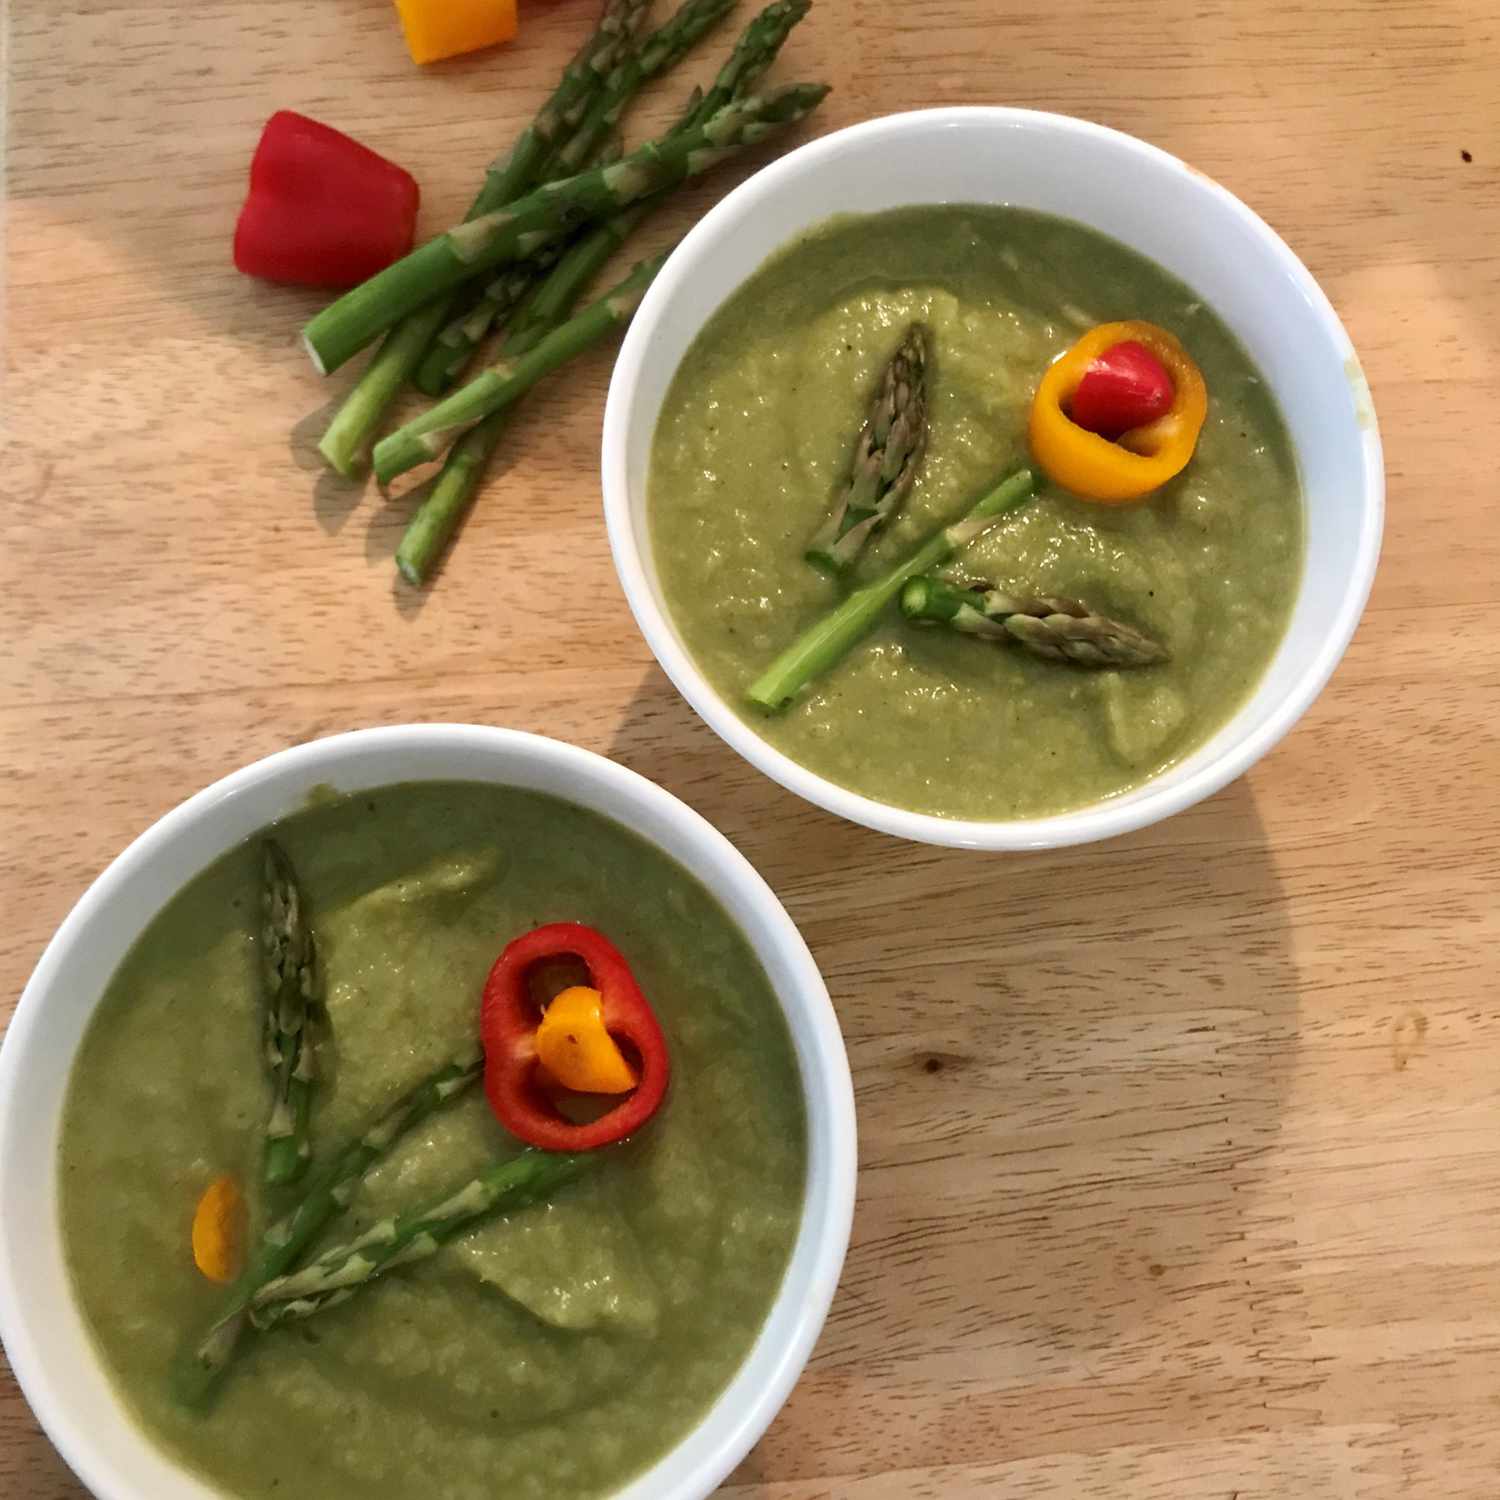 Two bowls of Creamy Asparagus and Cauliflower Soup